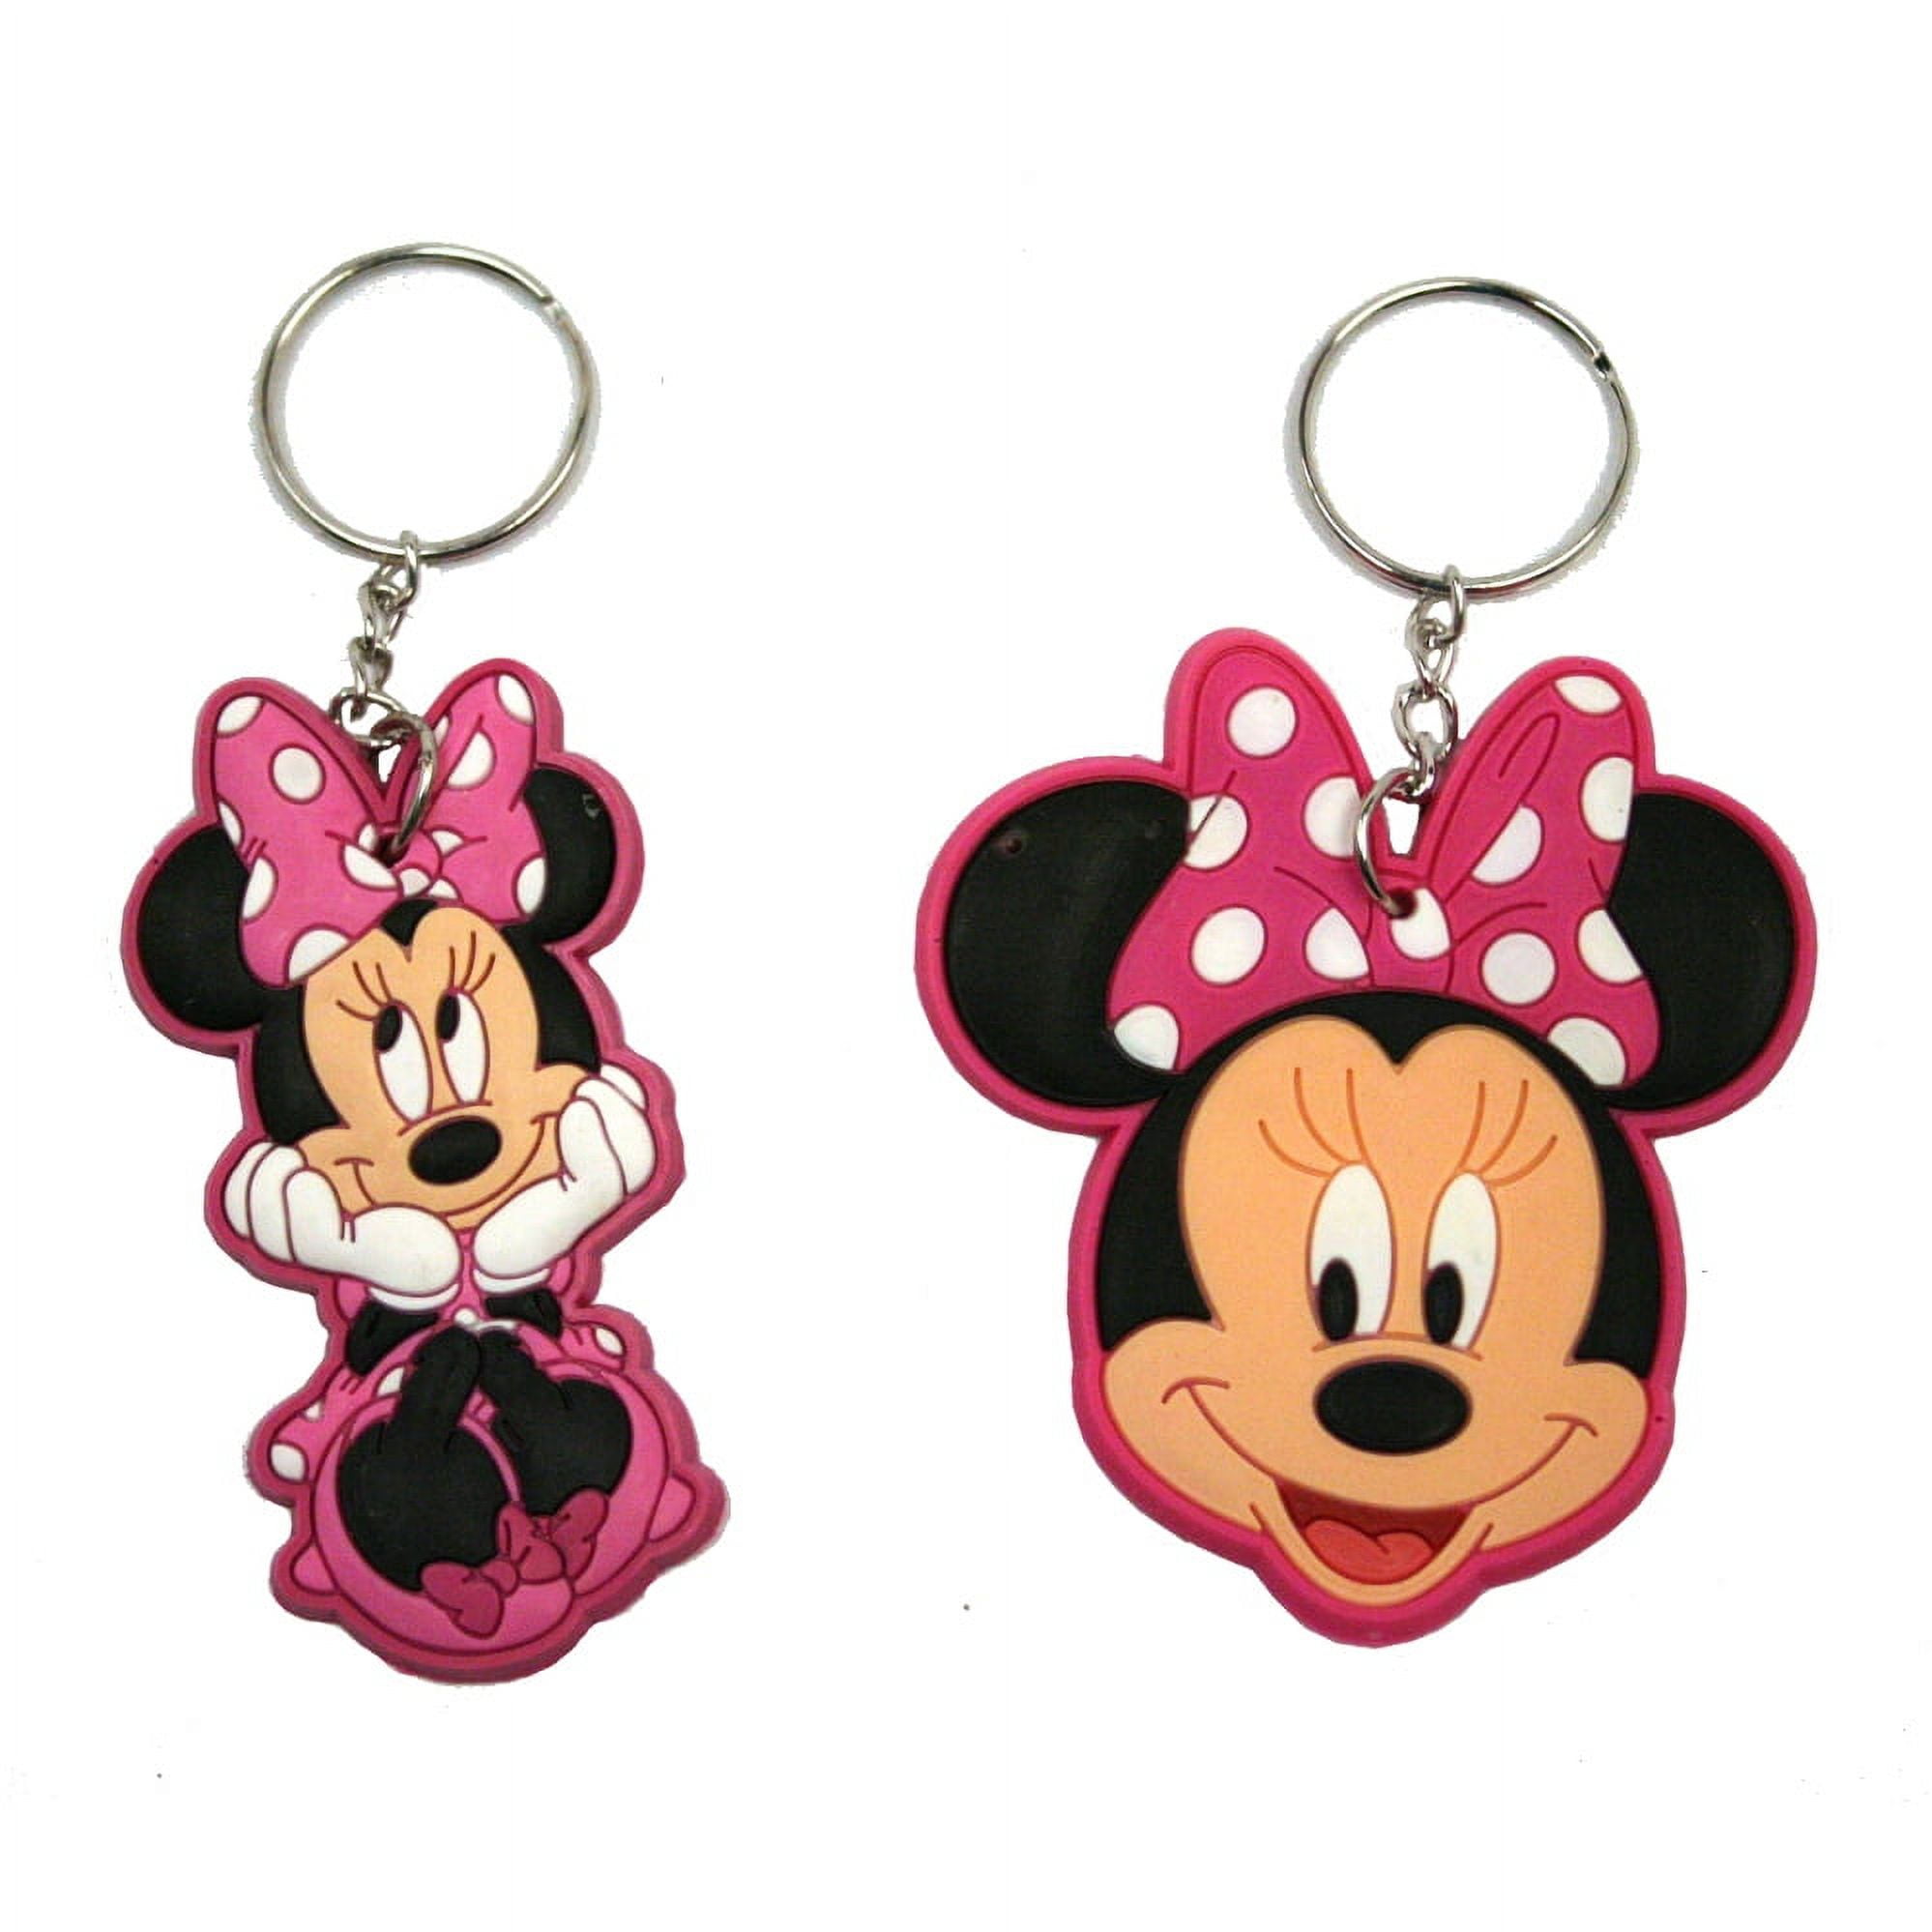 Minnie Keychain Keyring in Handmade Personalised Gift Pouch 